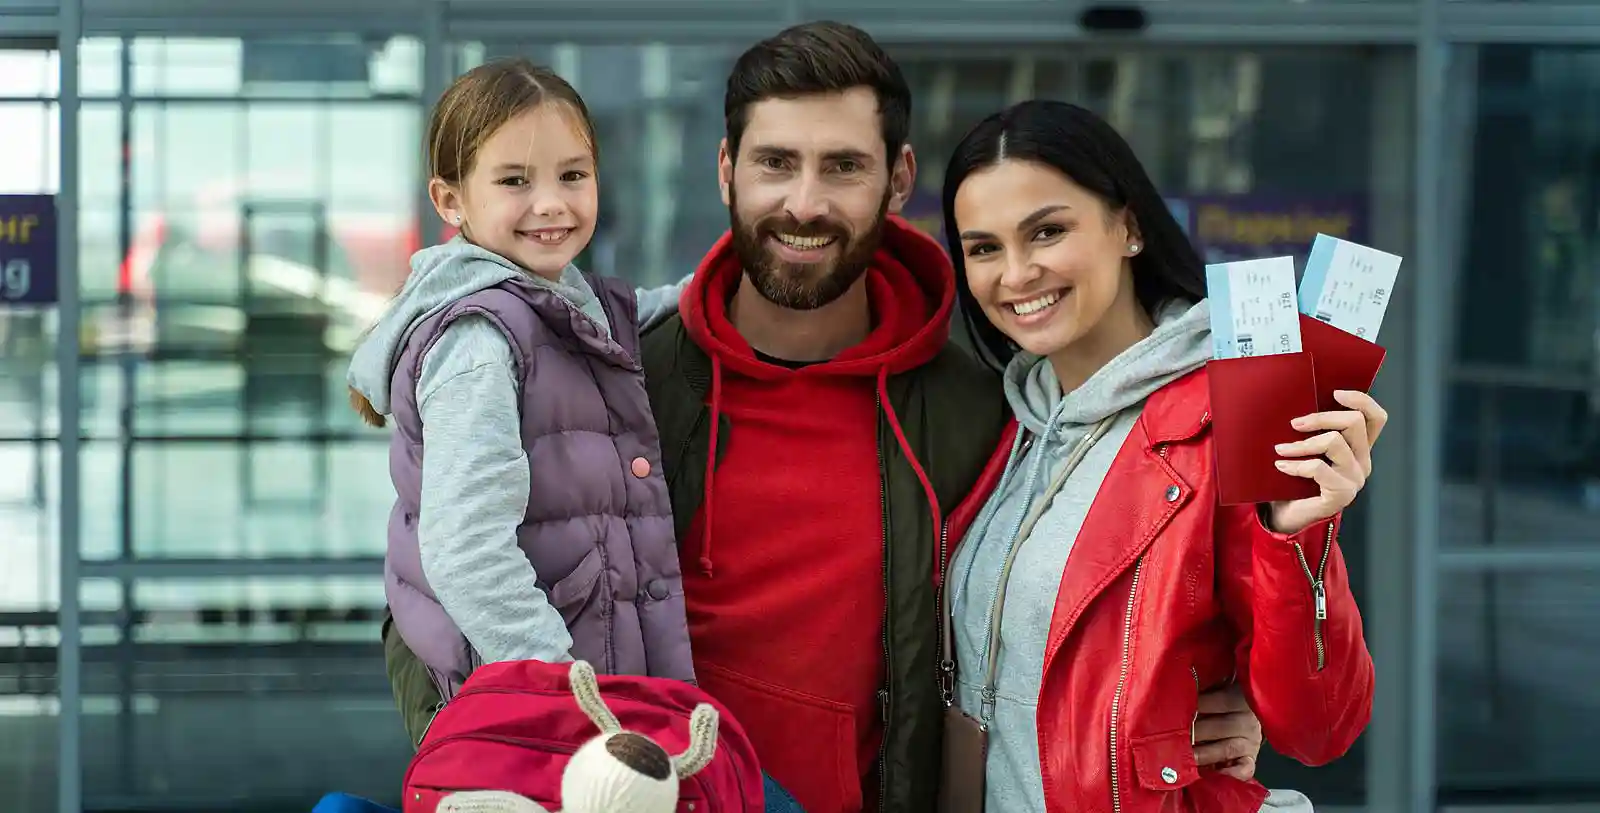 A happy family in airport: With Turkish passport you can travel to more than 100 countires without visa requirements 